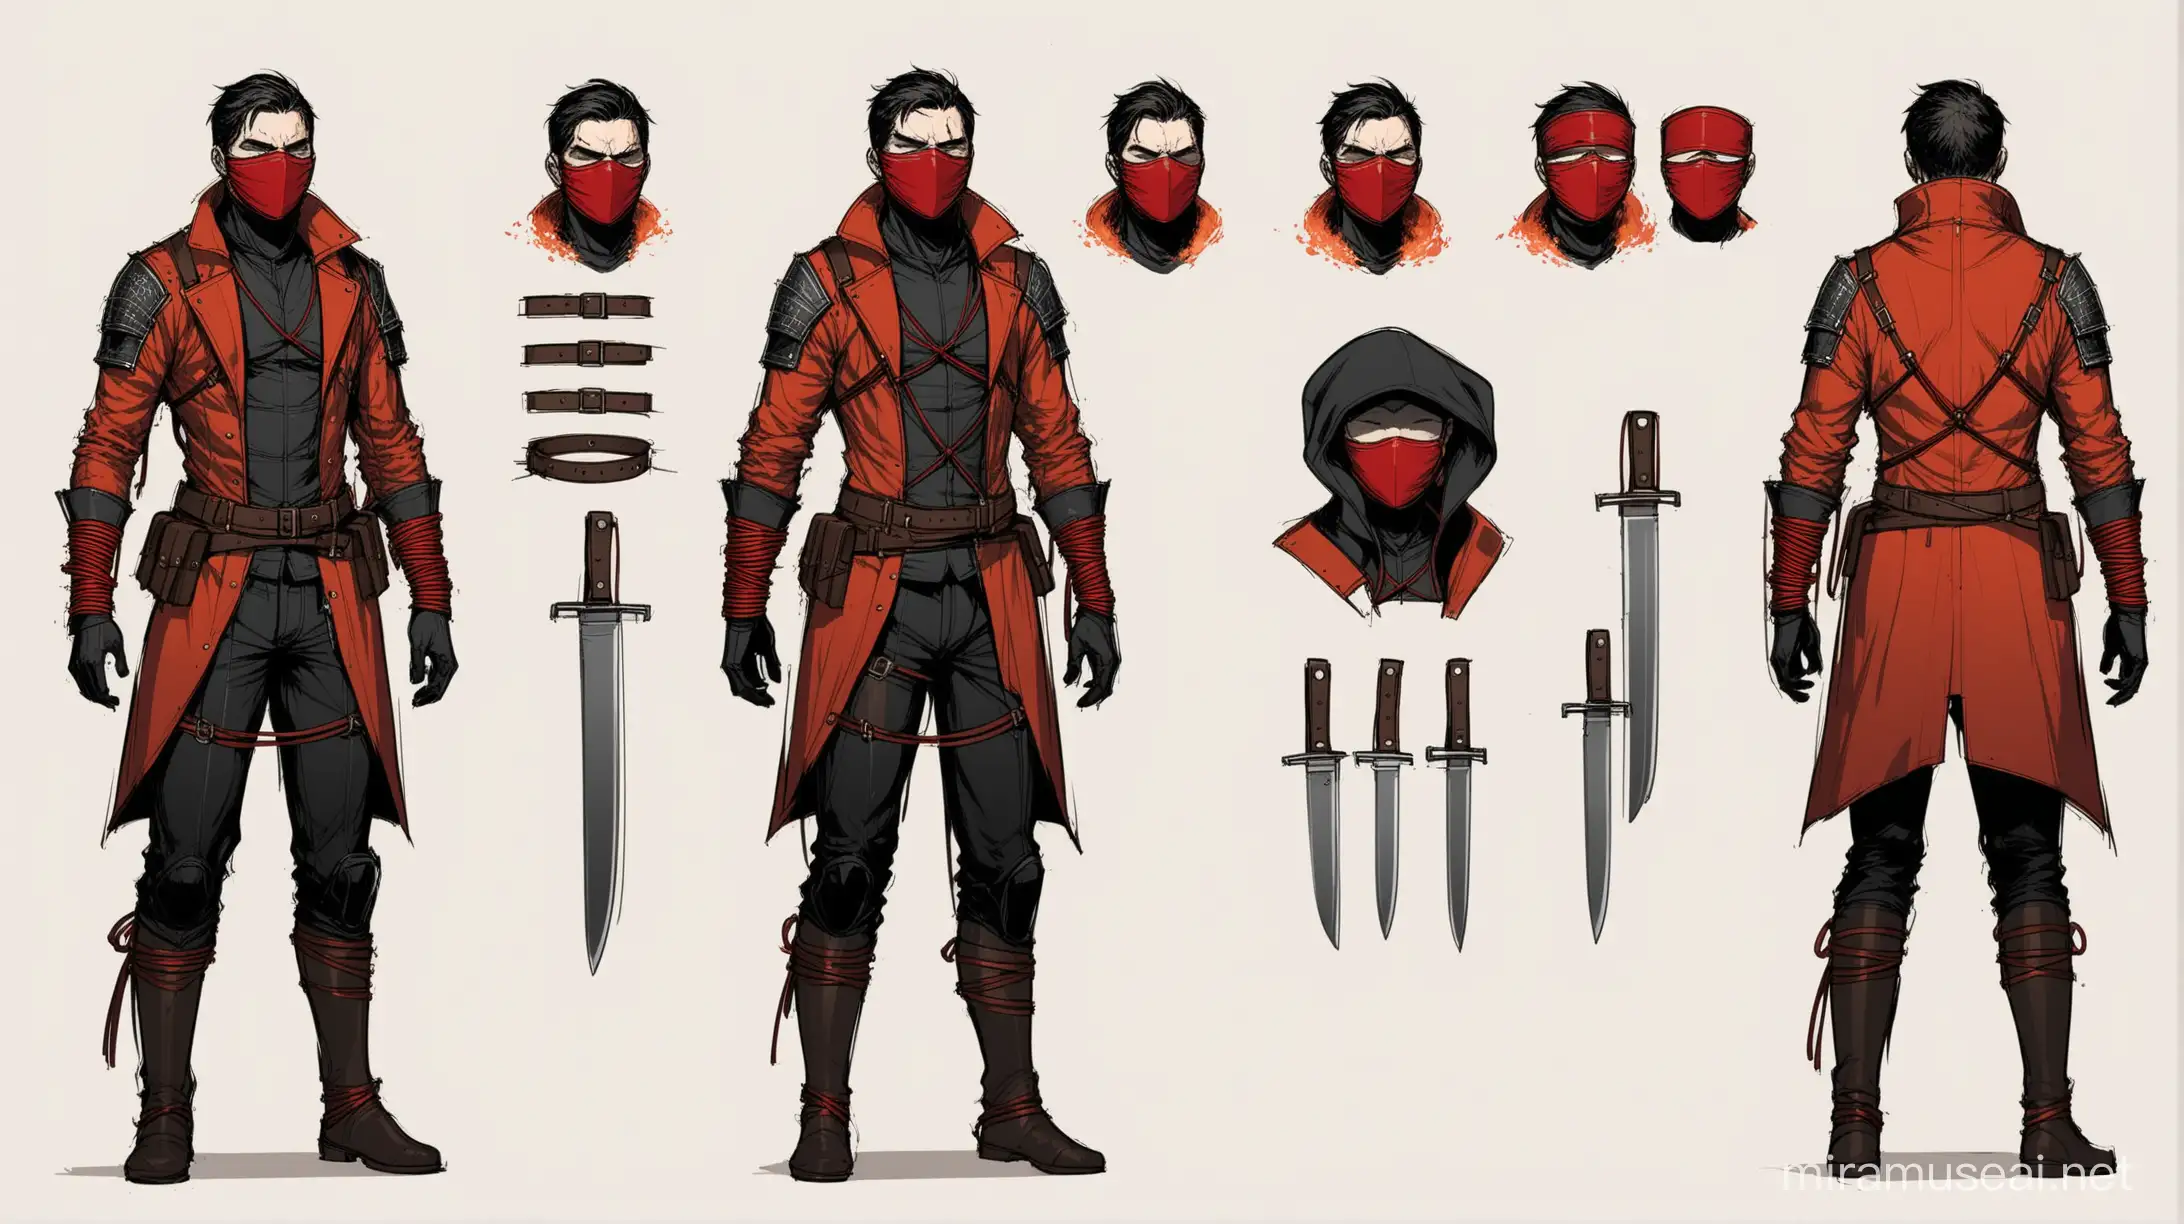 concept art of the character, short jacket with straps on the arms, bdsm costume, straps on the arms, leather mask on the face, concept art, full-length character, red steam around the body, sheath for knives on the leg, elements of Bondage.